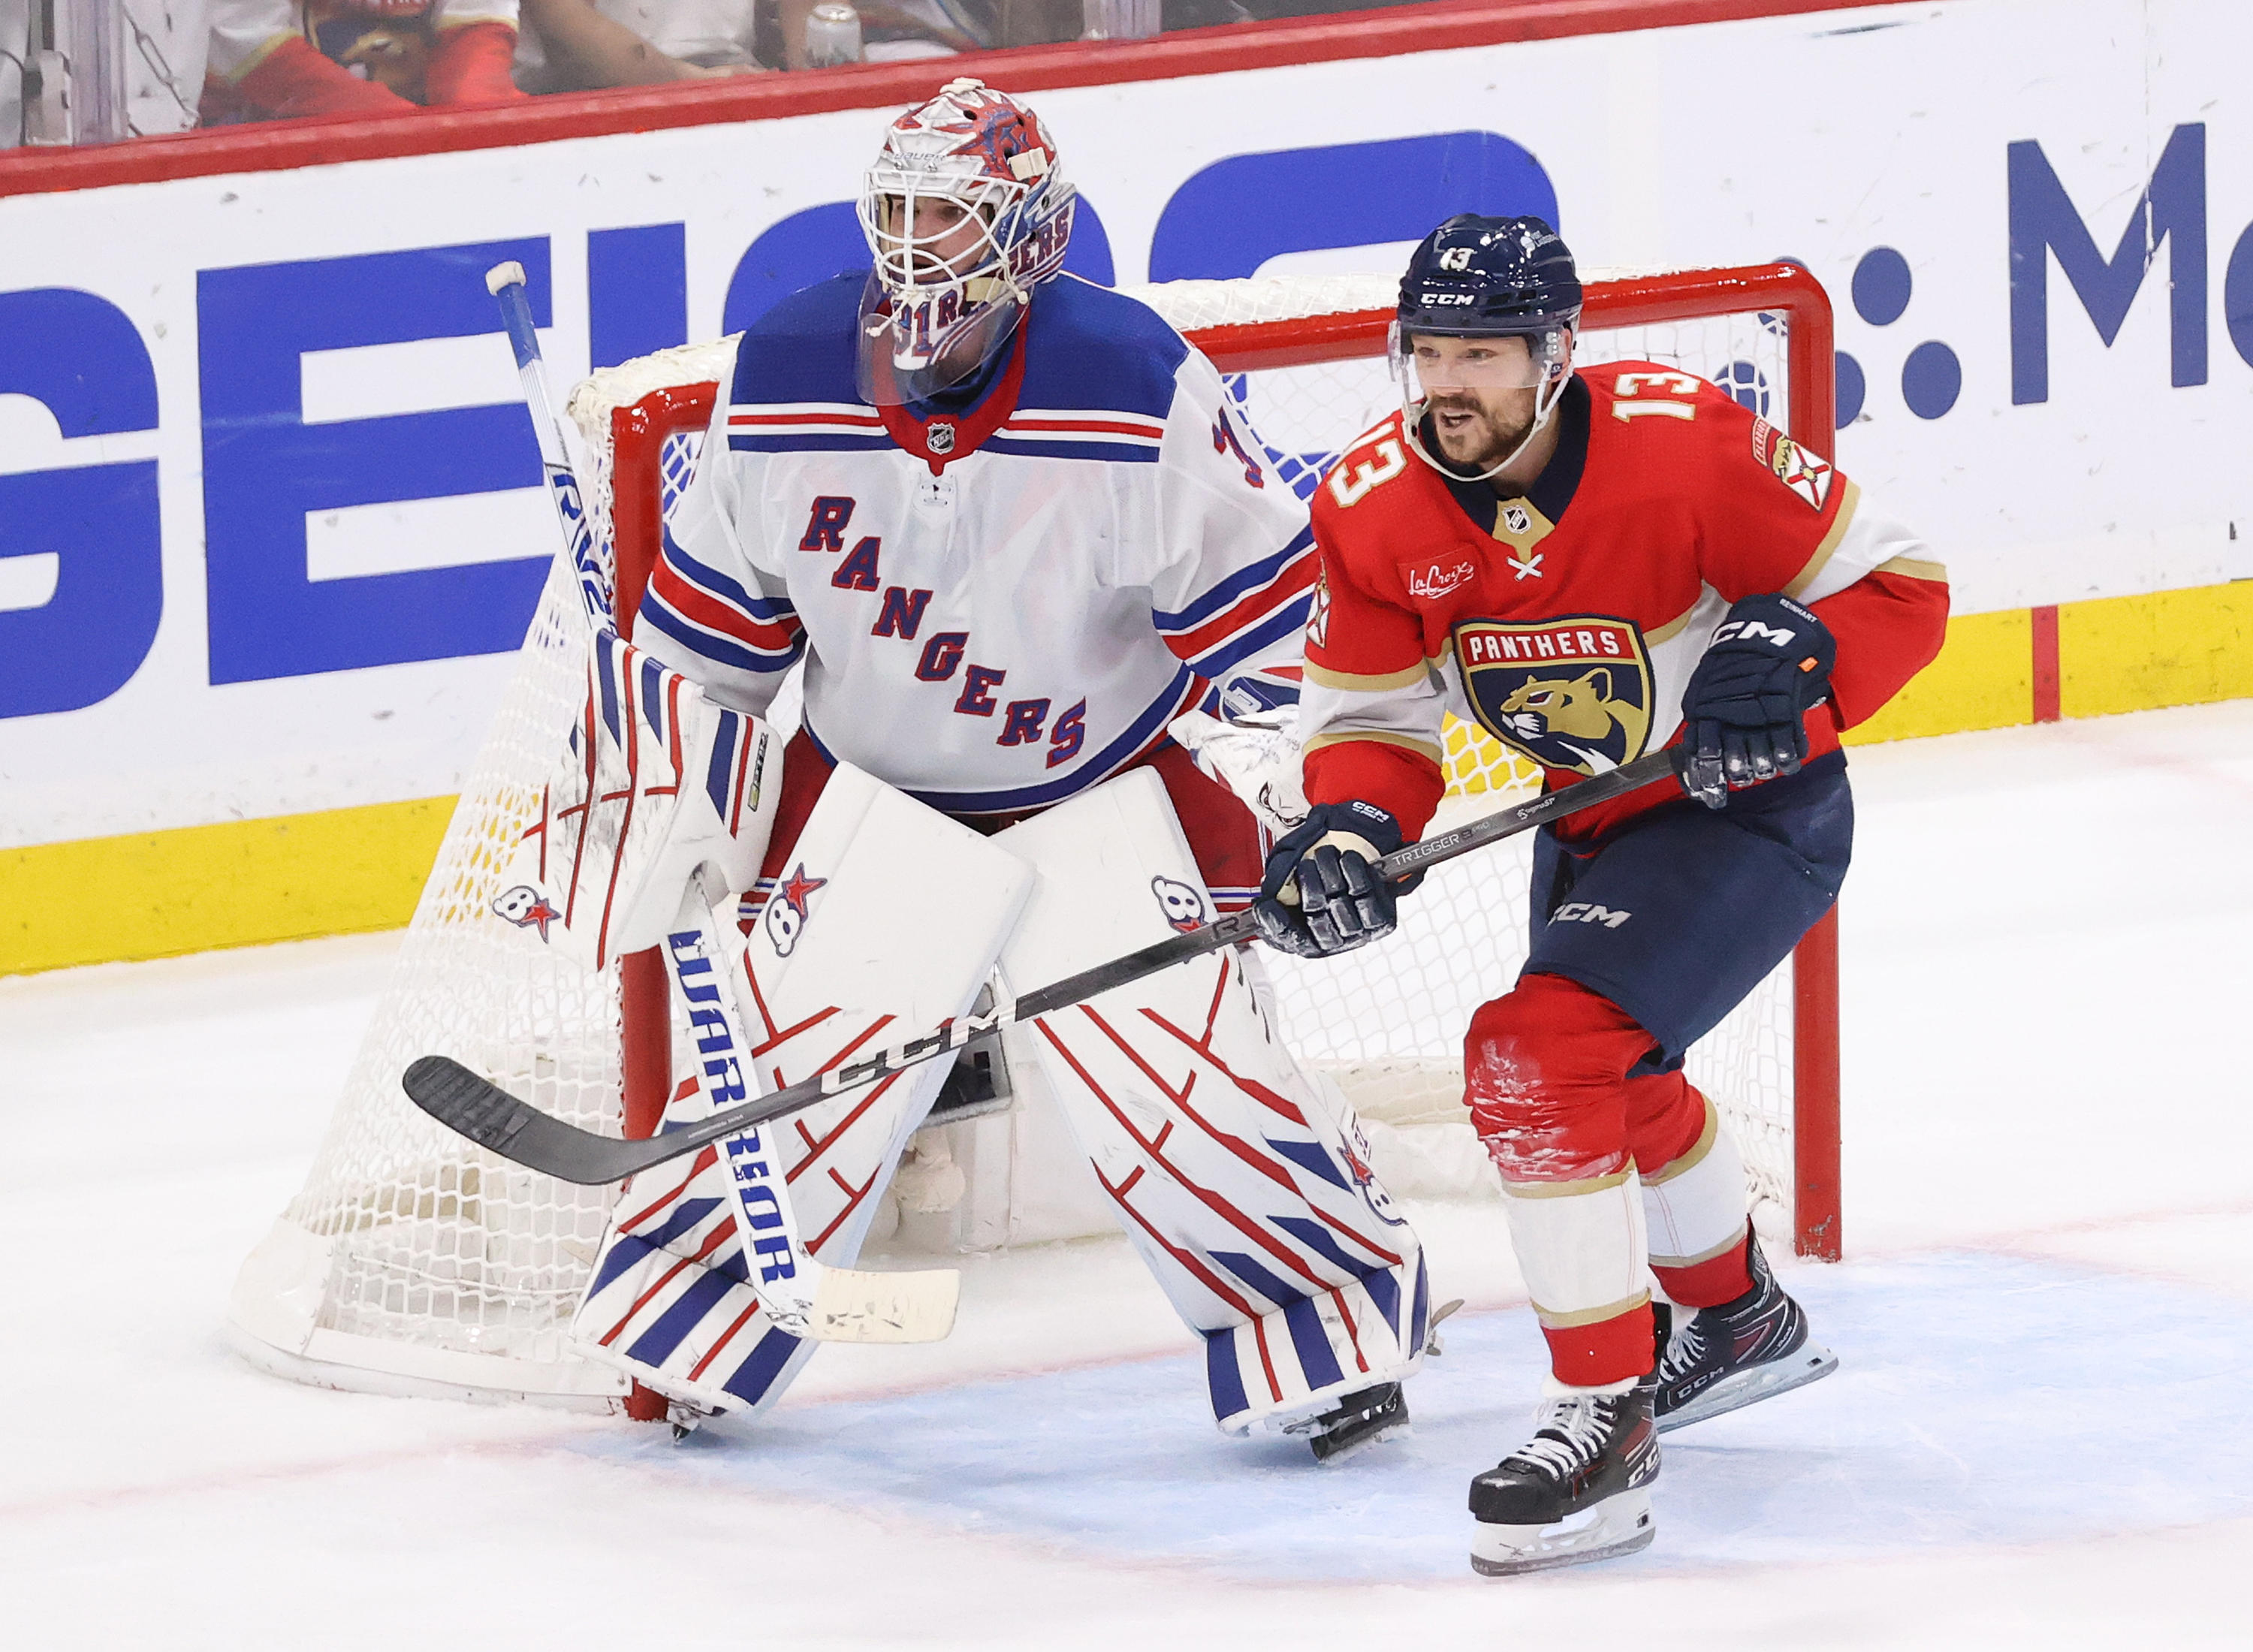 How to watch the Florida Panthers vs. New York Rangers NHL Playoffs